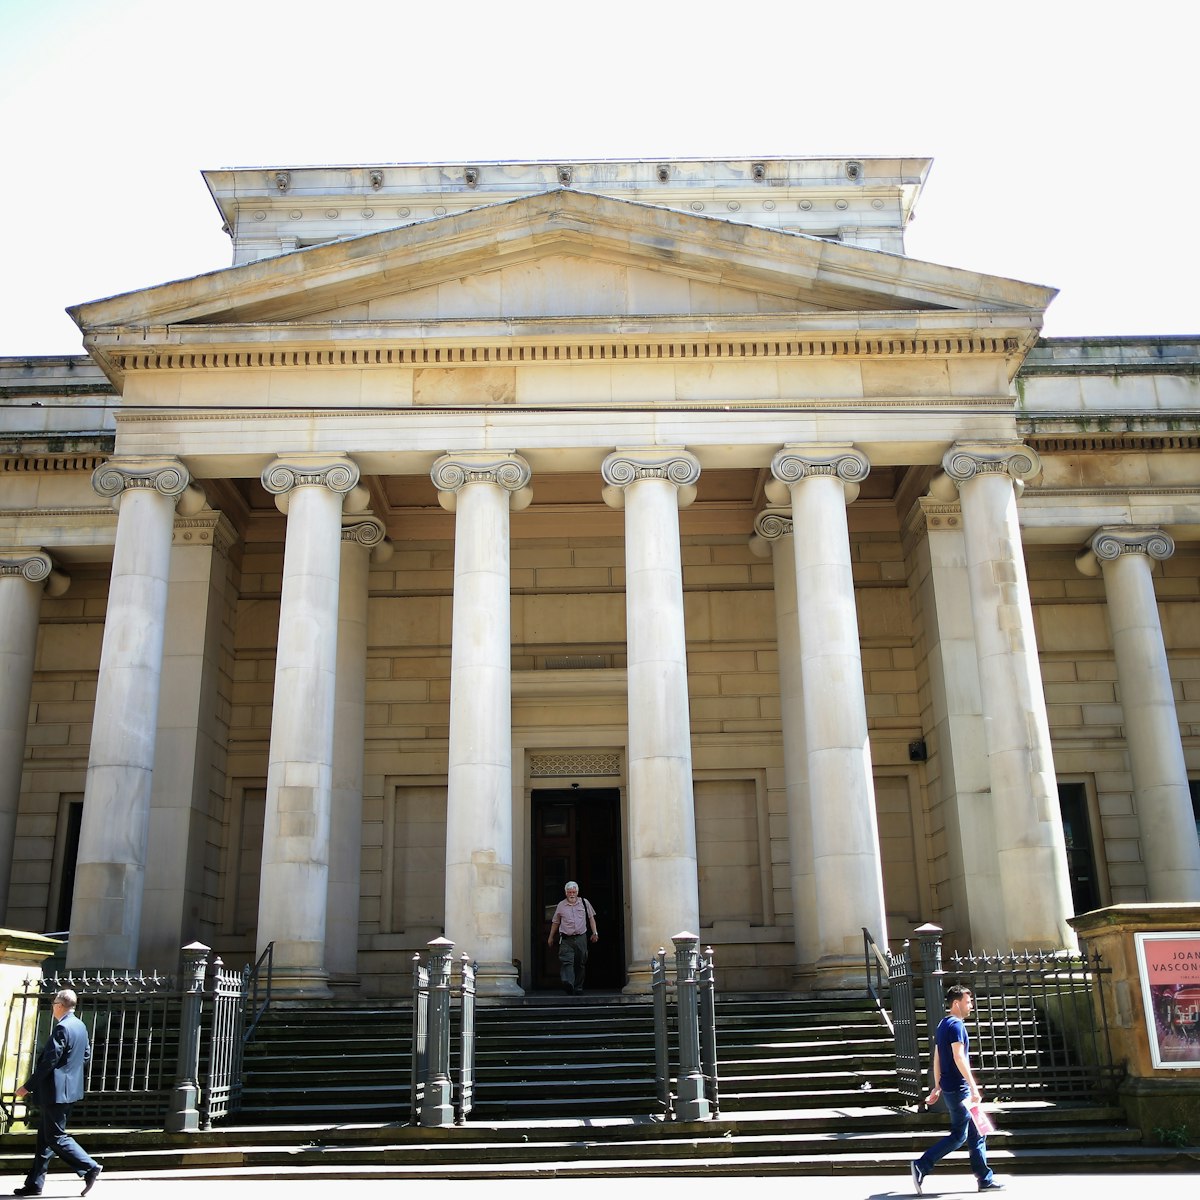 MANCHESTER, ENGLAND - JUNE 23:  A general view of Manchester Art Gallery  in the City of Manchester, on June 23, 2014 in Manchester, England.  Chancellor George Osborne announced today the possibility of HS3 high-speed rail link between Manchester and Leeds that would help build a "northern global powerhouse" linking cities in the North of England.  (Photo by Christopher Furlong/Getty Images)